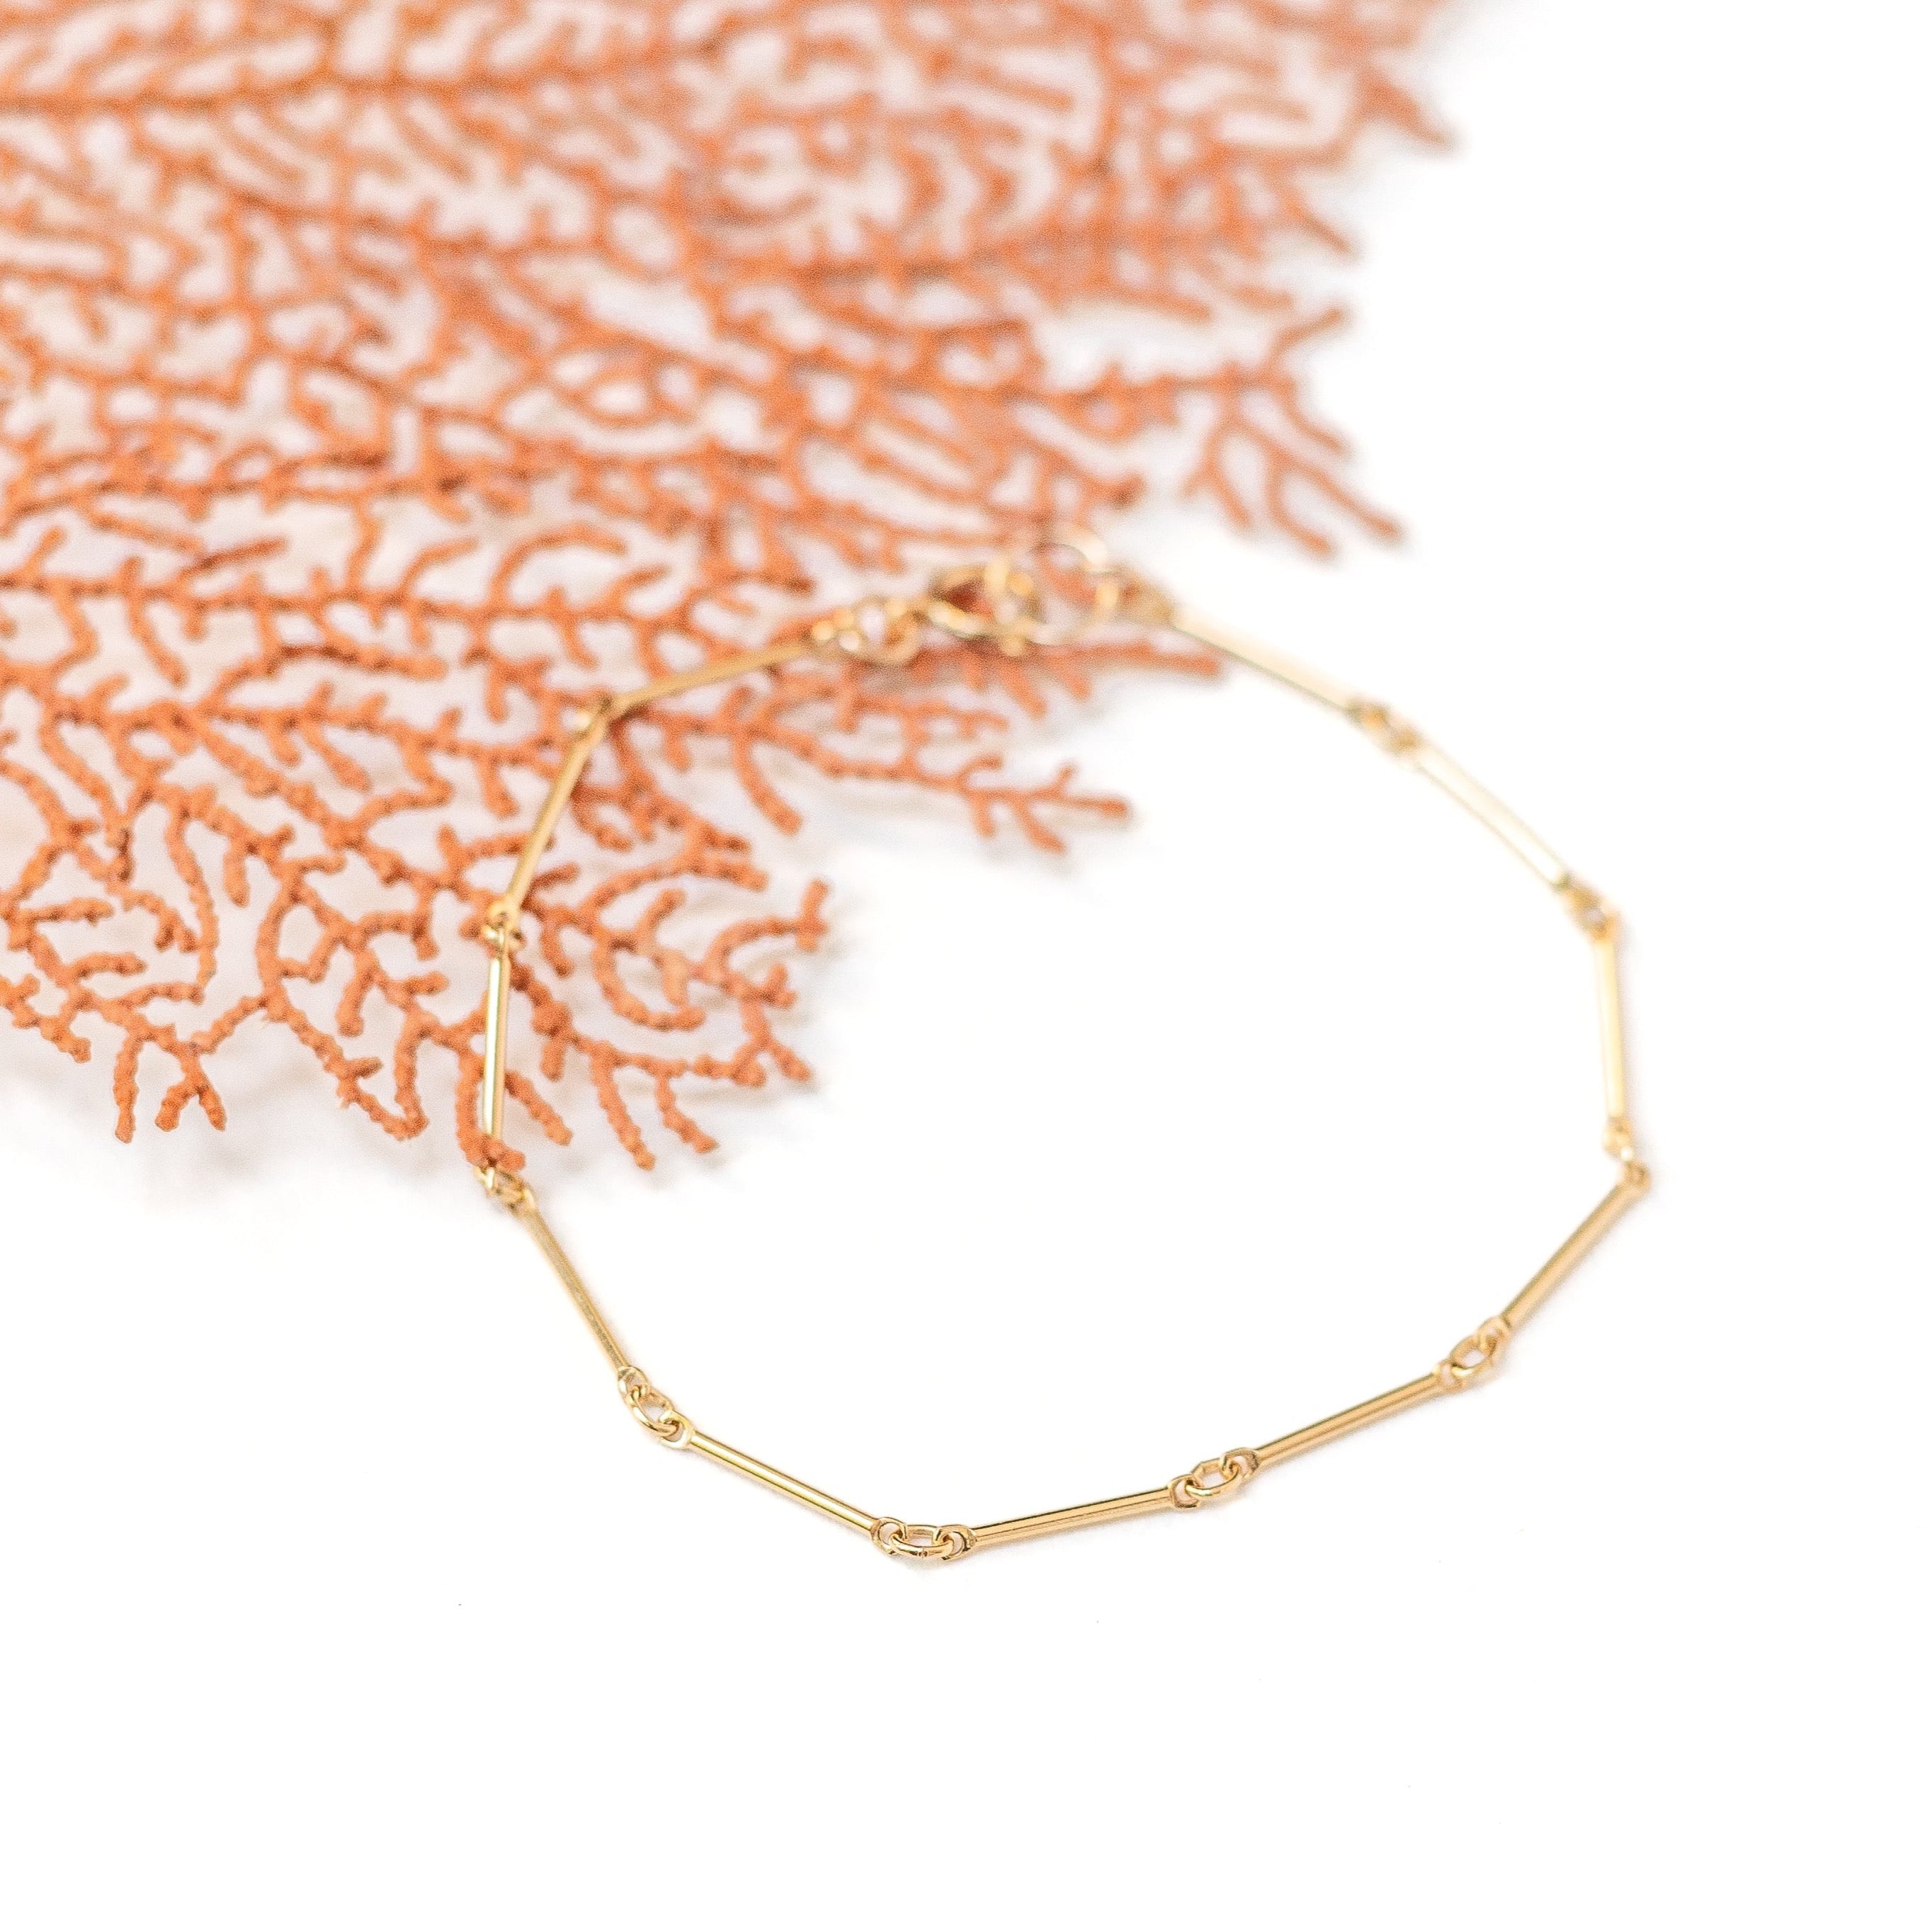 dainty gold bracelet with stick chain. Shown on a piece of coral. 